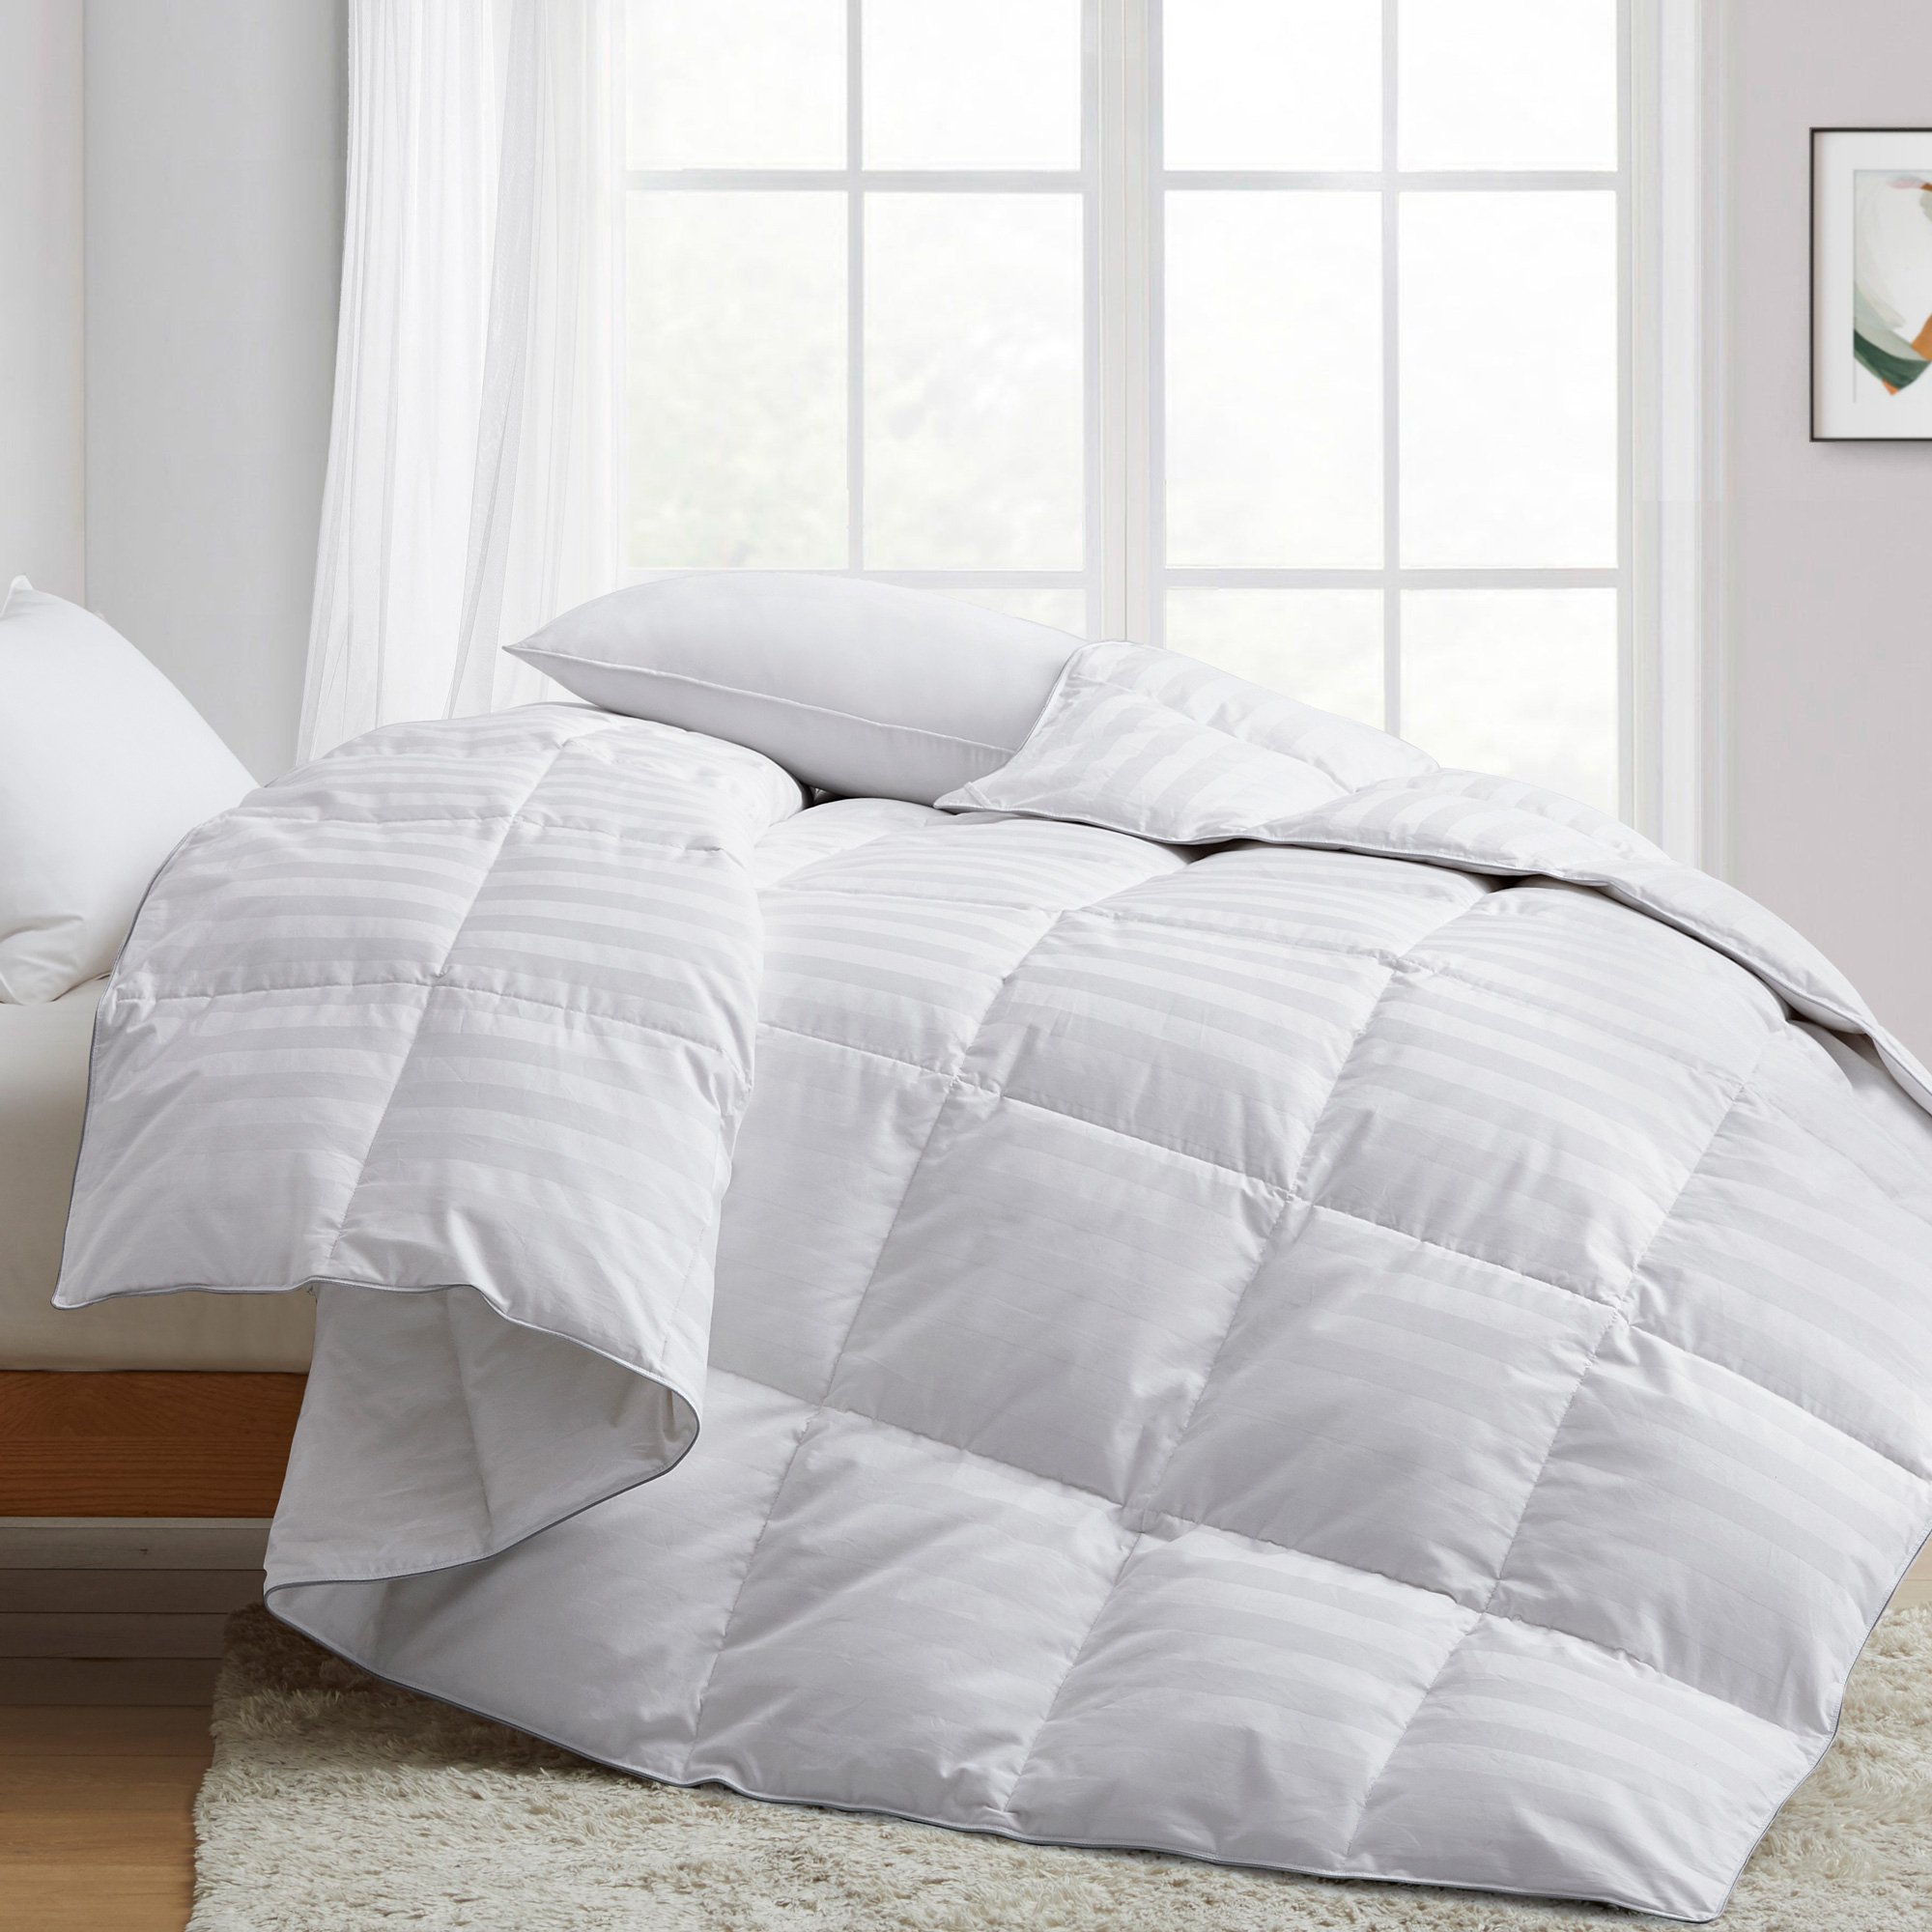 All Seasons Feather Fiber And Down Comforter Cotton Cover 500 TC - King, White